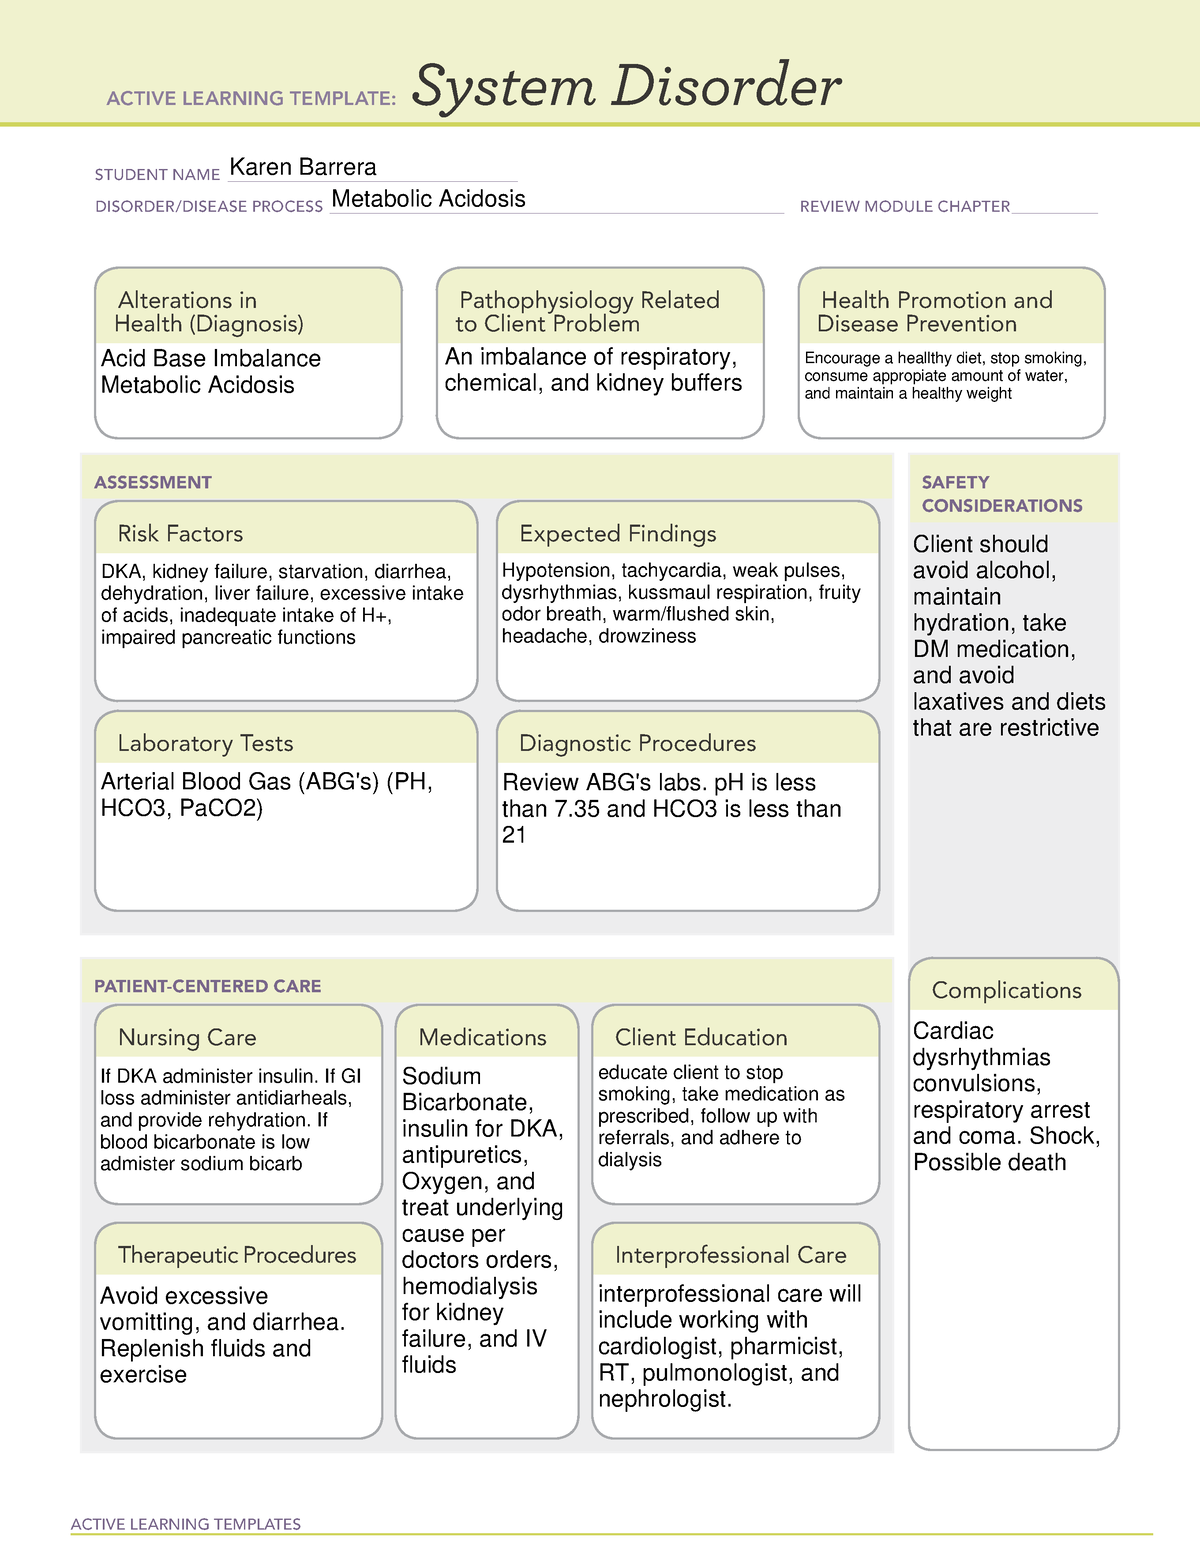 Metabolic Acidosis System disorder template ACTIVE LEARNING TEMPLATES